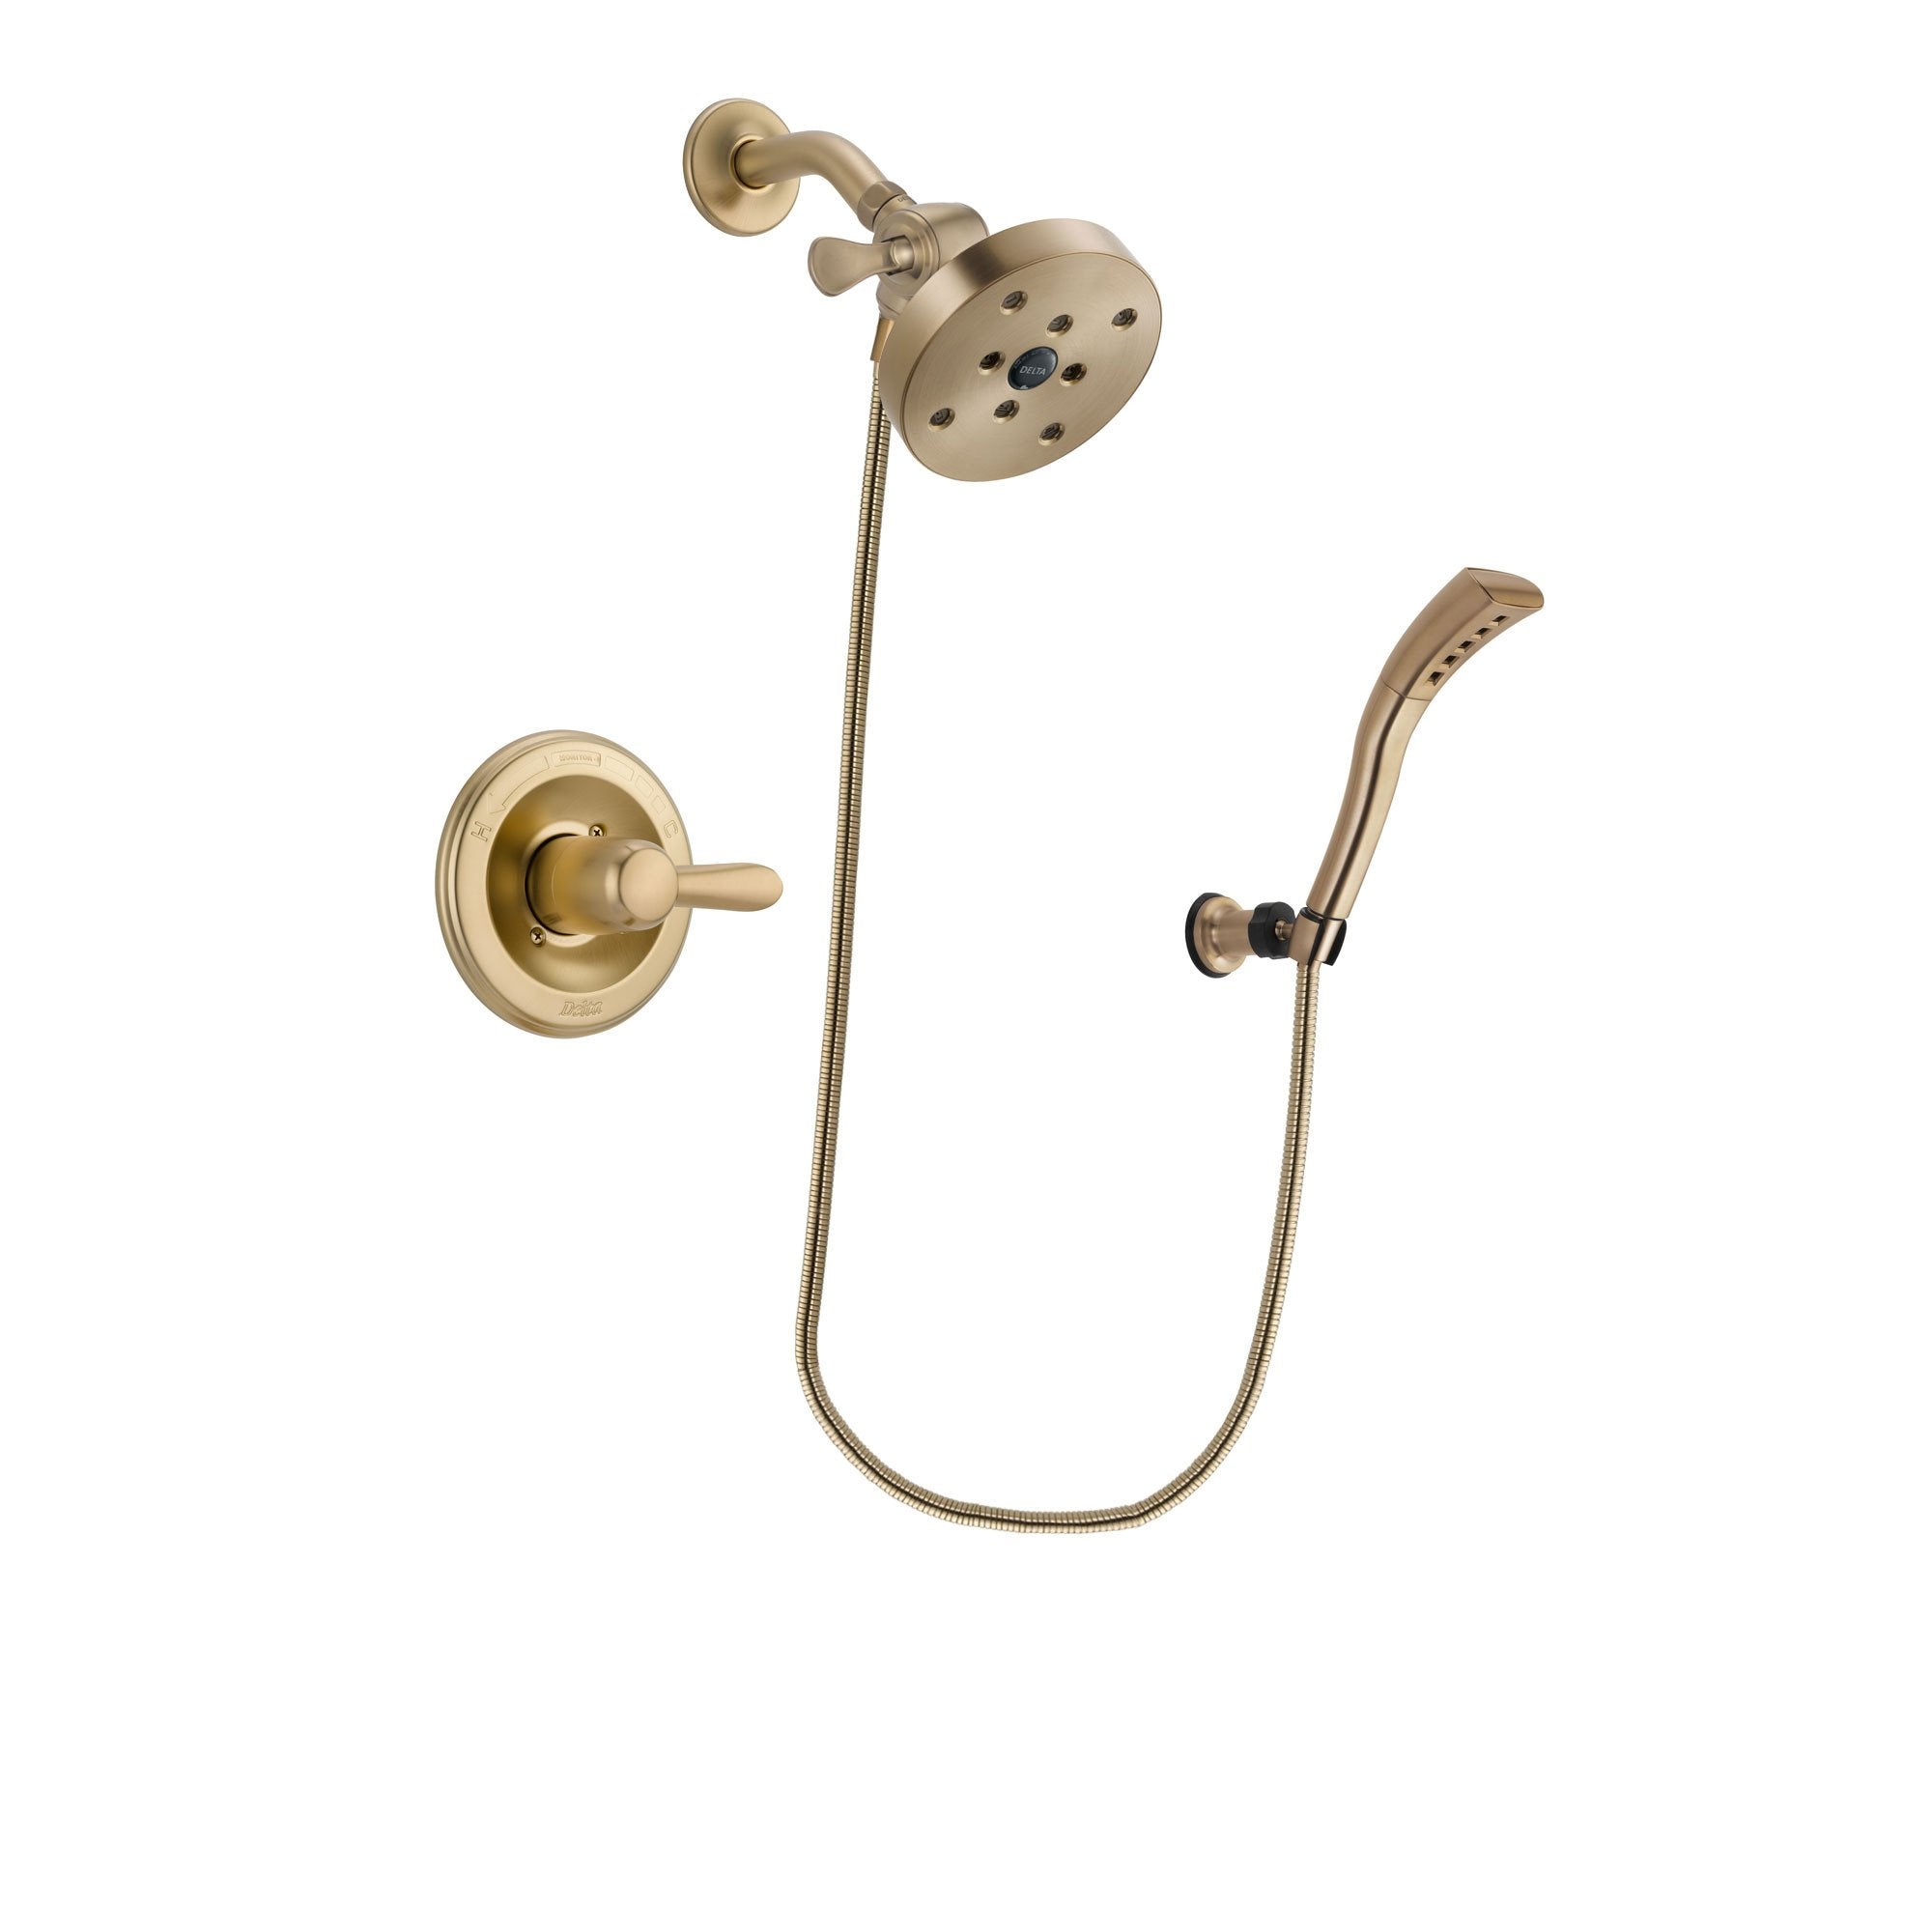 Delta Lahara Champagne Bronze Finish Shower Faucet System Package with 5-1/2 inch Showerhead and Modern Wall Mount Personal Handheld Shower Spray Includes Rough-in Valve DSP3716V